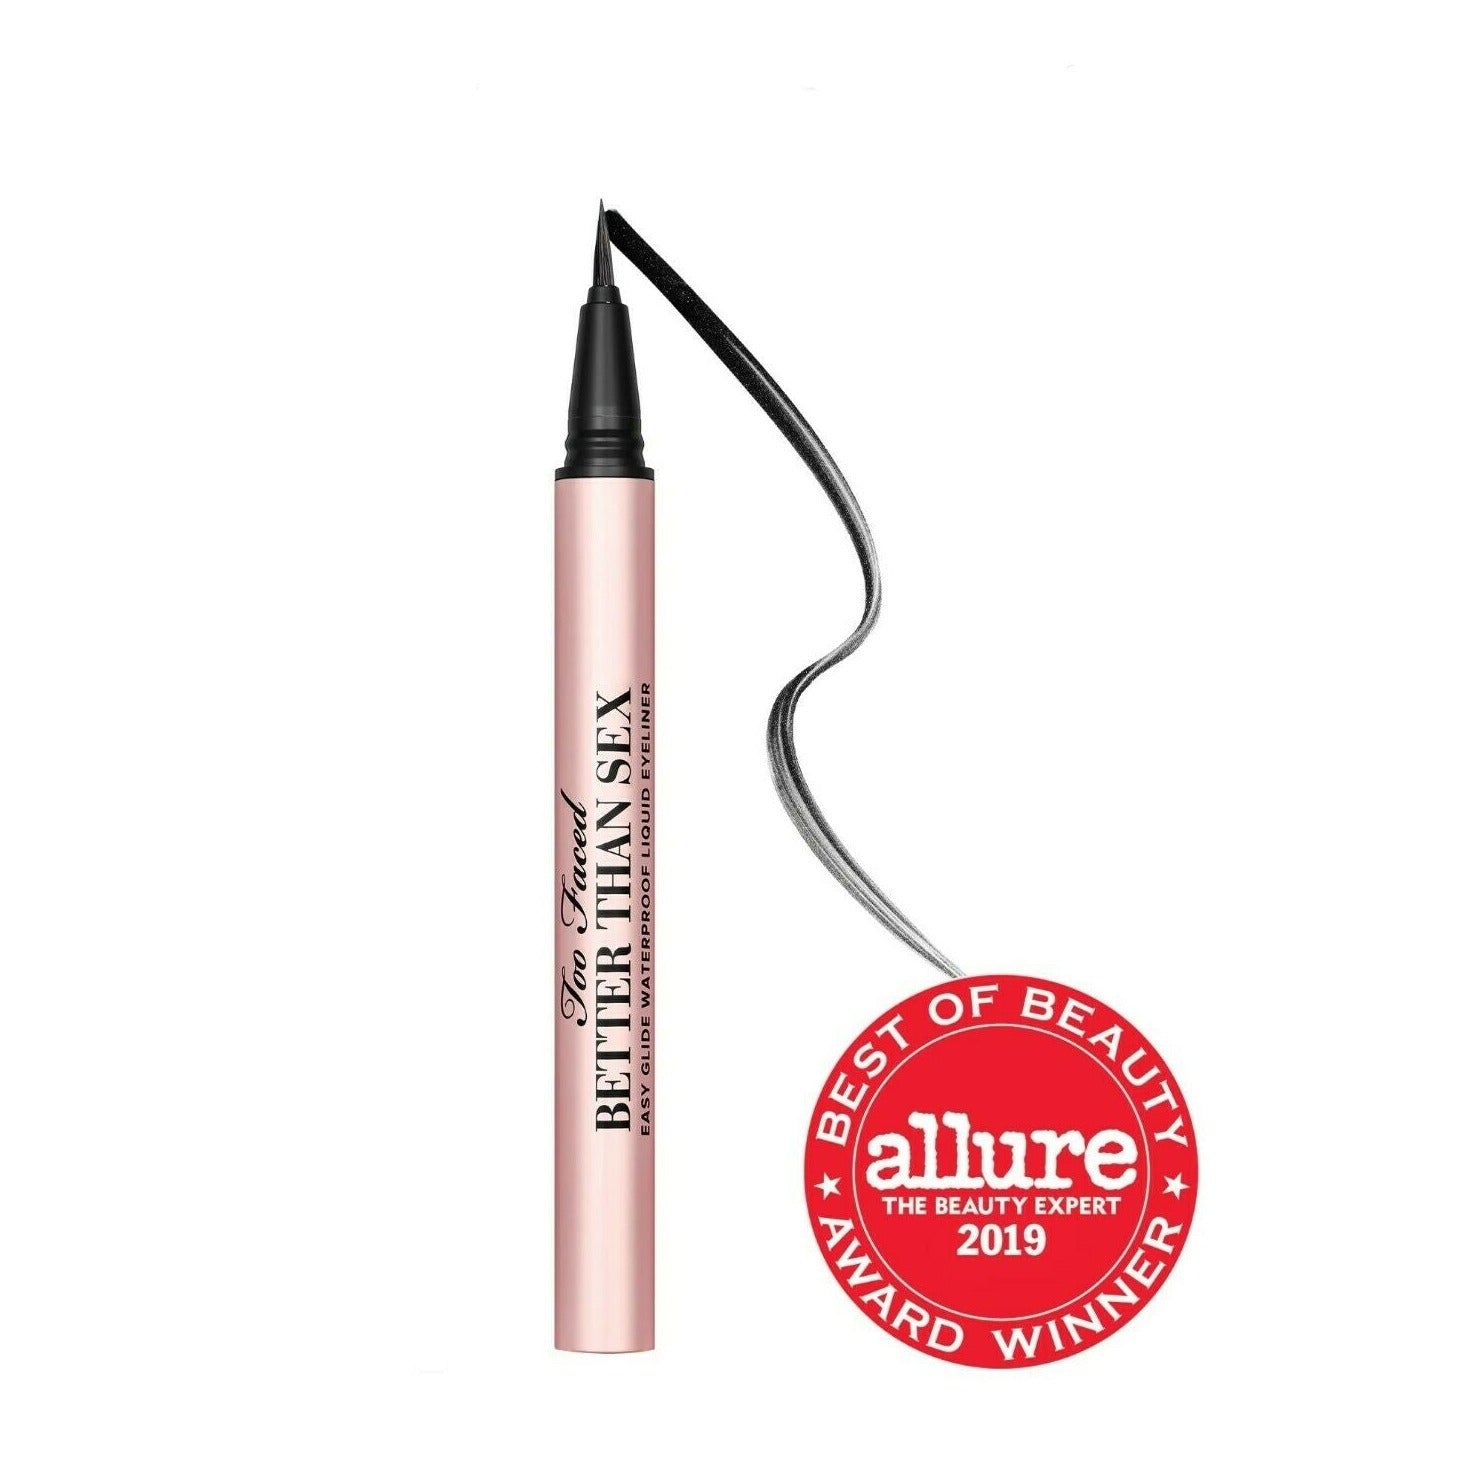 This cutting-edge liquid eyeliner is the easiest you'll ever use, created to produce a sharp, fluid, smudge-proof line, every time!  Ingredient Callouts: Free of parabens and phthalates. This product is also vegan, cruelty-free, and gluten-free.